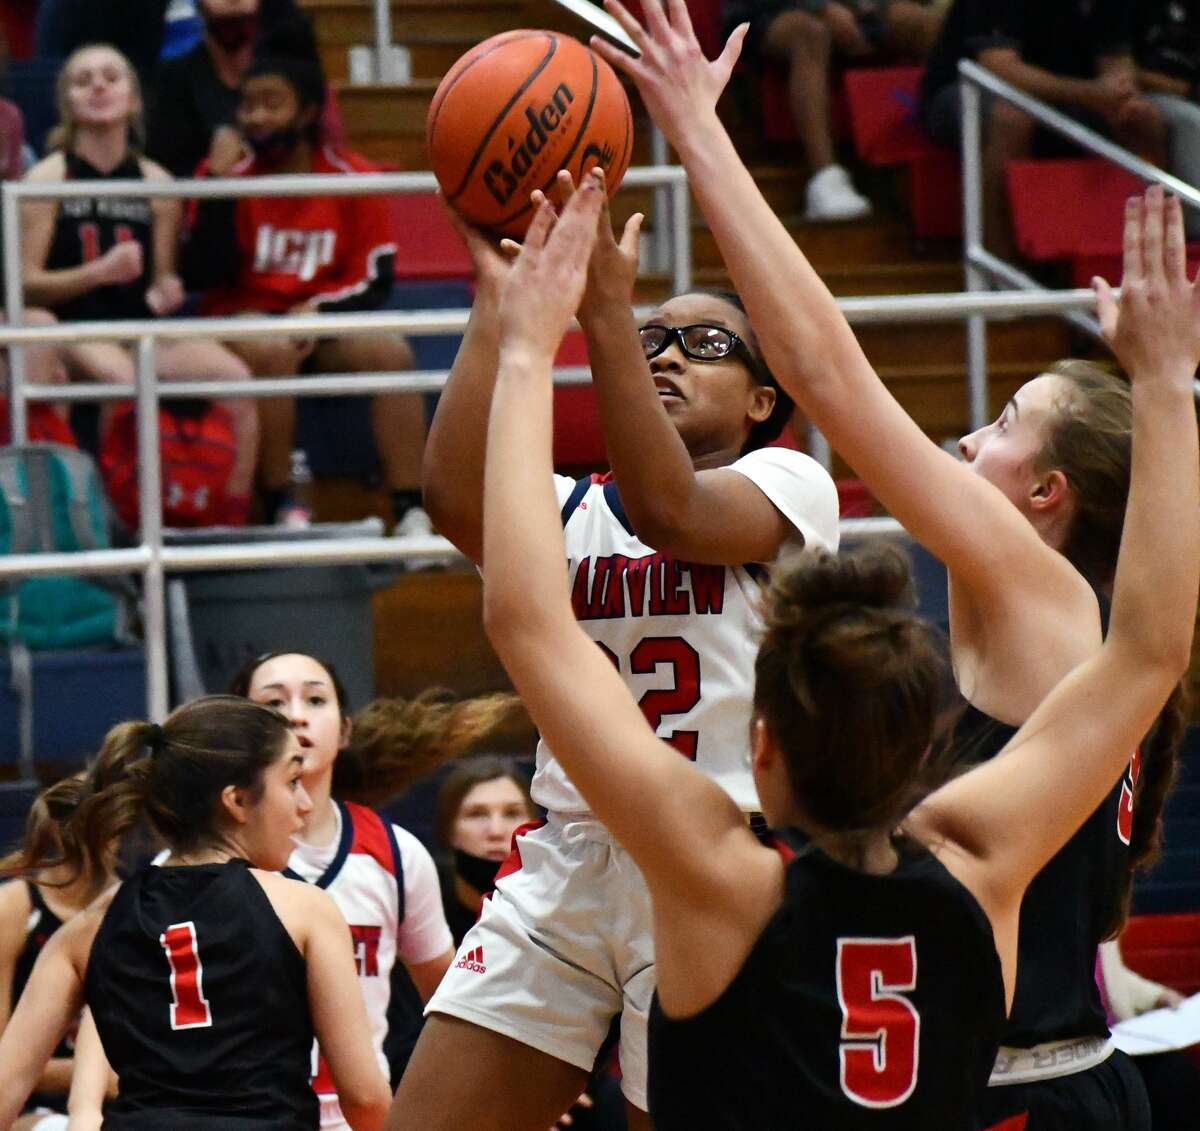 The Plainview boys and girls basketball teams each hosted Lubbock-Cooper in non-district contests on Tuesday, Nov. 17, 2020 in the Dog House at Plainview High School.